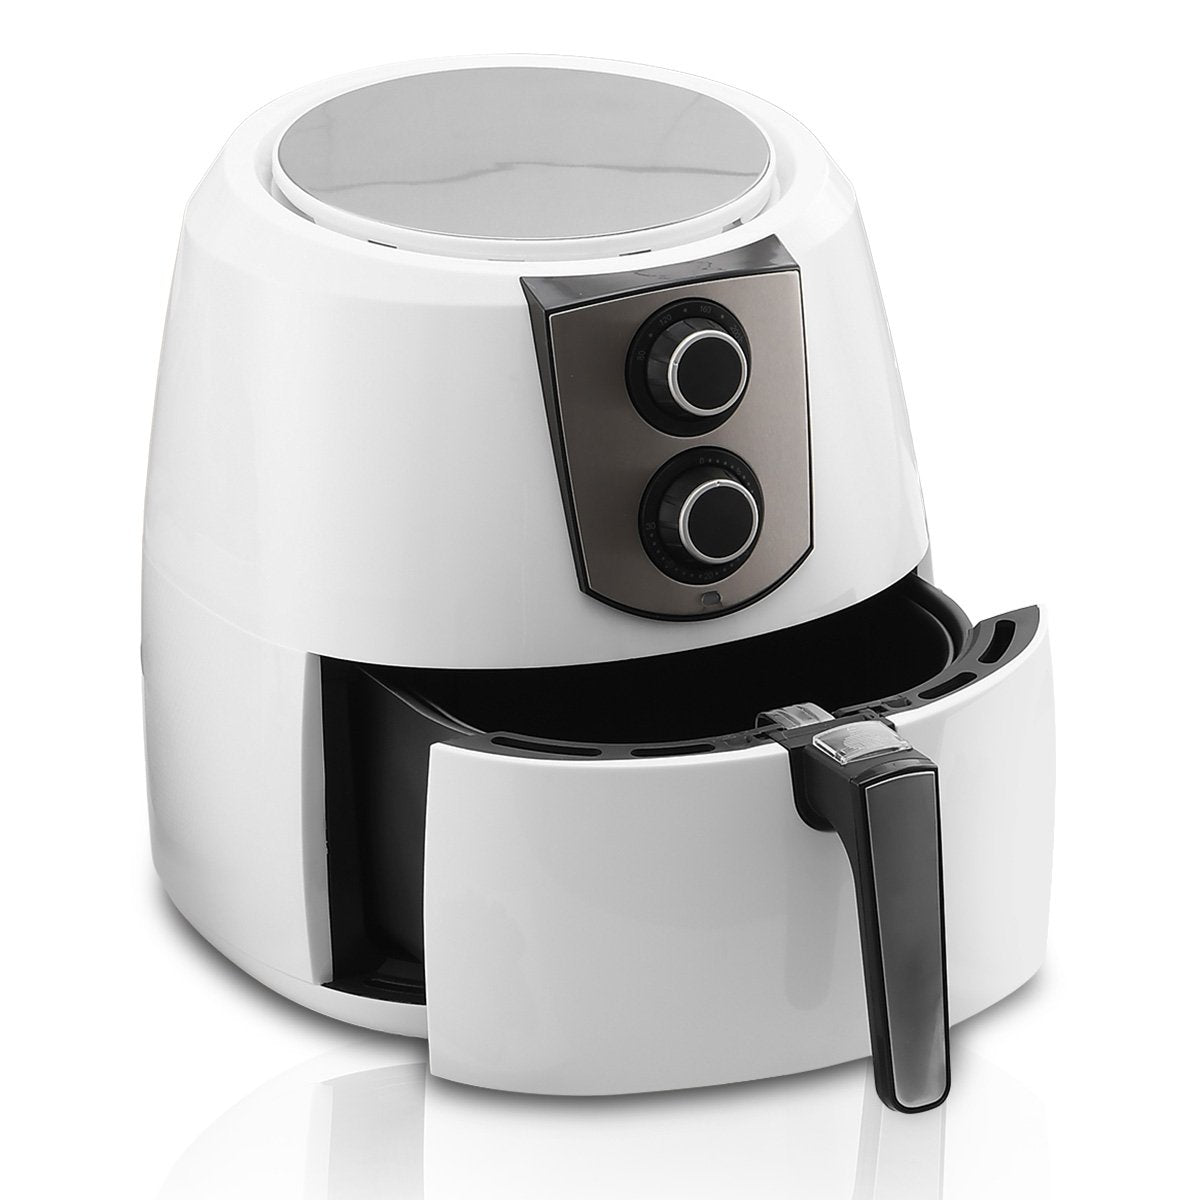 Pronti 7.2l 1800w Electric Air Fryer Healthy Cooker Fryers Kitchen Oven Oil Free Low Fat White